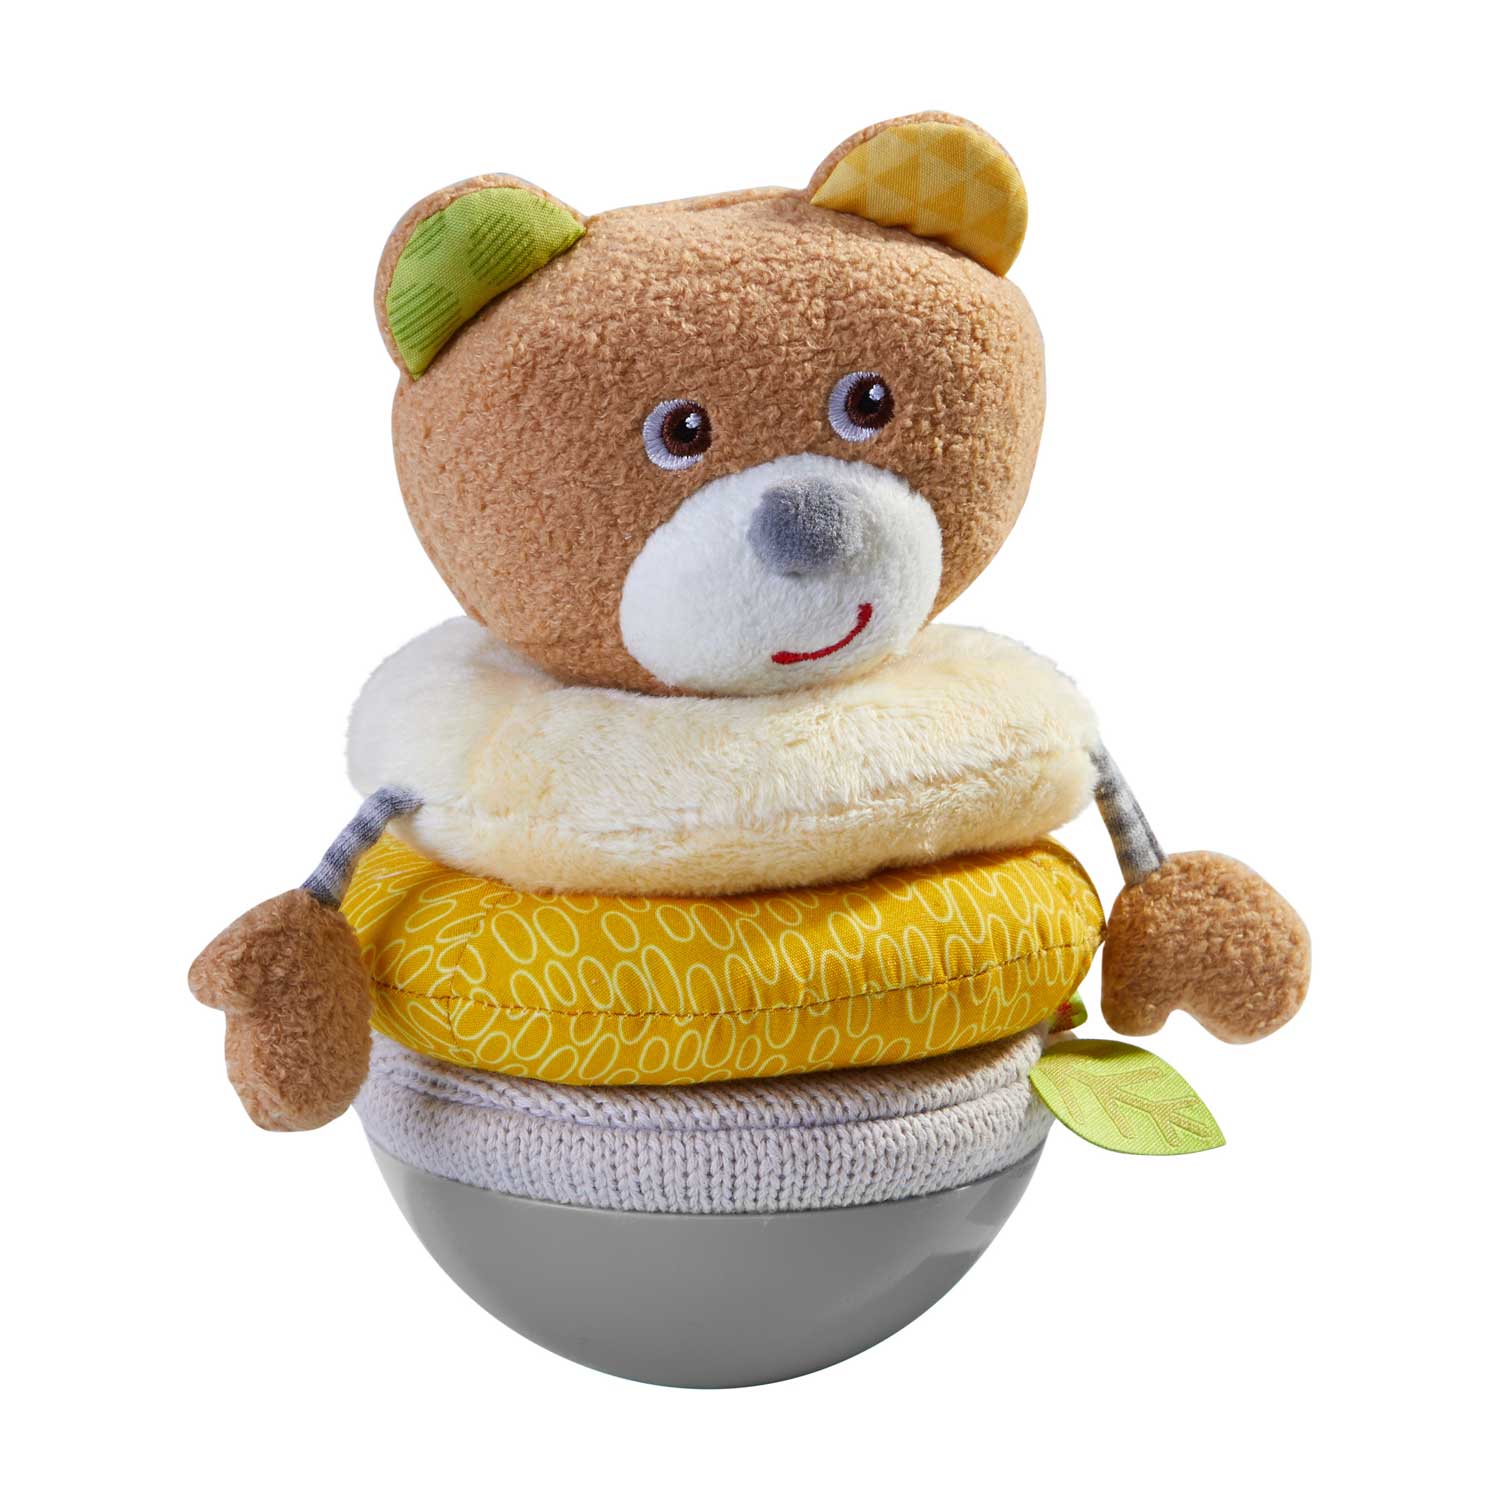 HABA USA - Roly Poly Bear with Stacking Rings